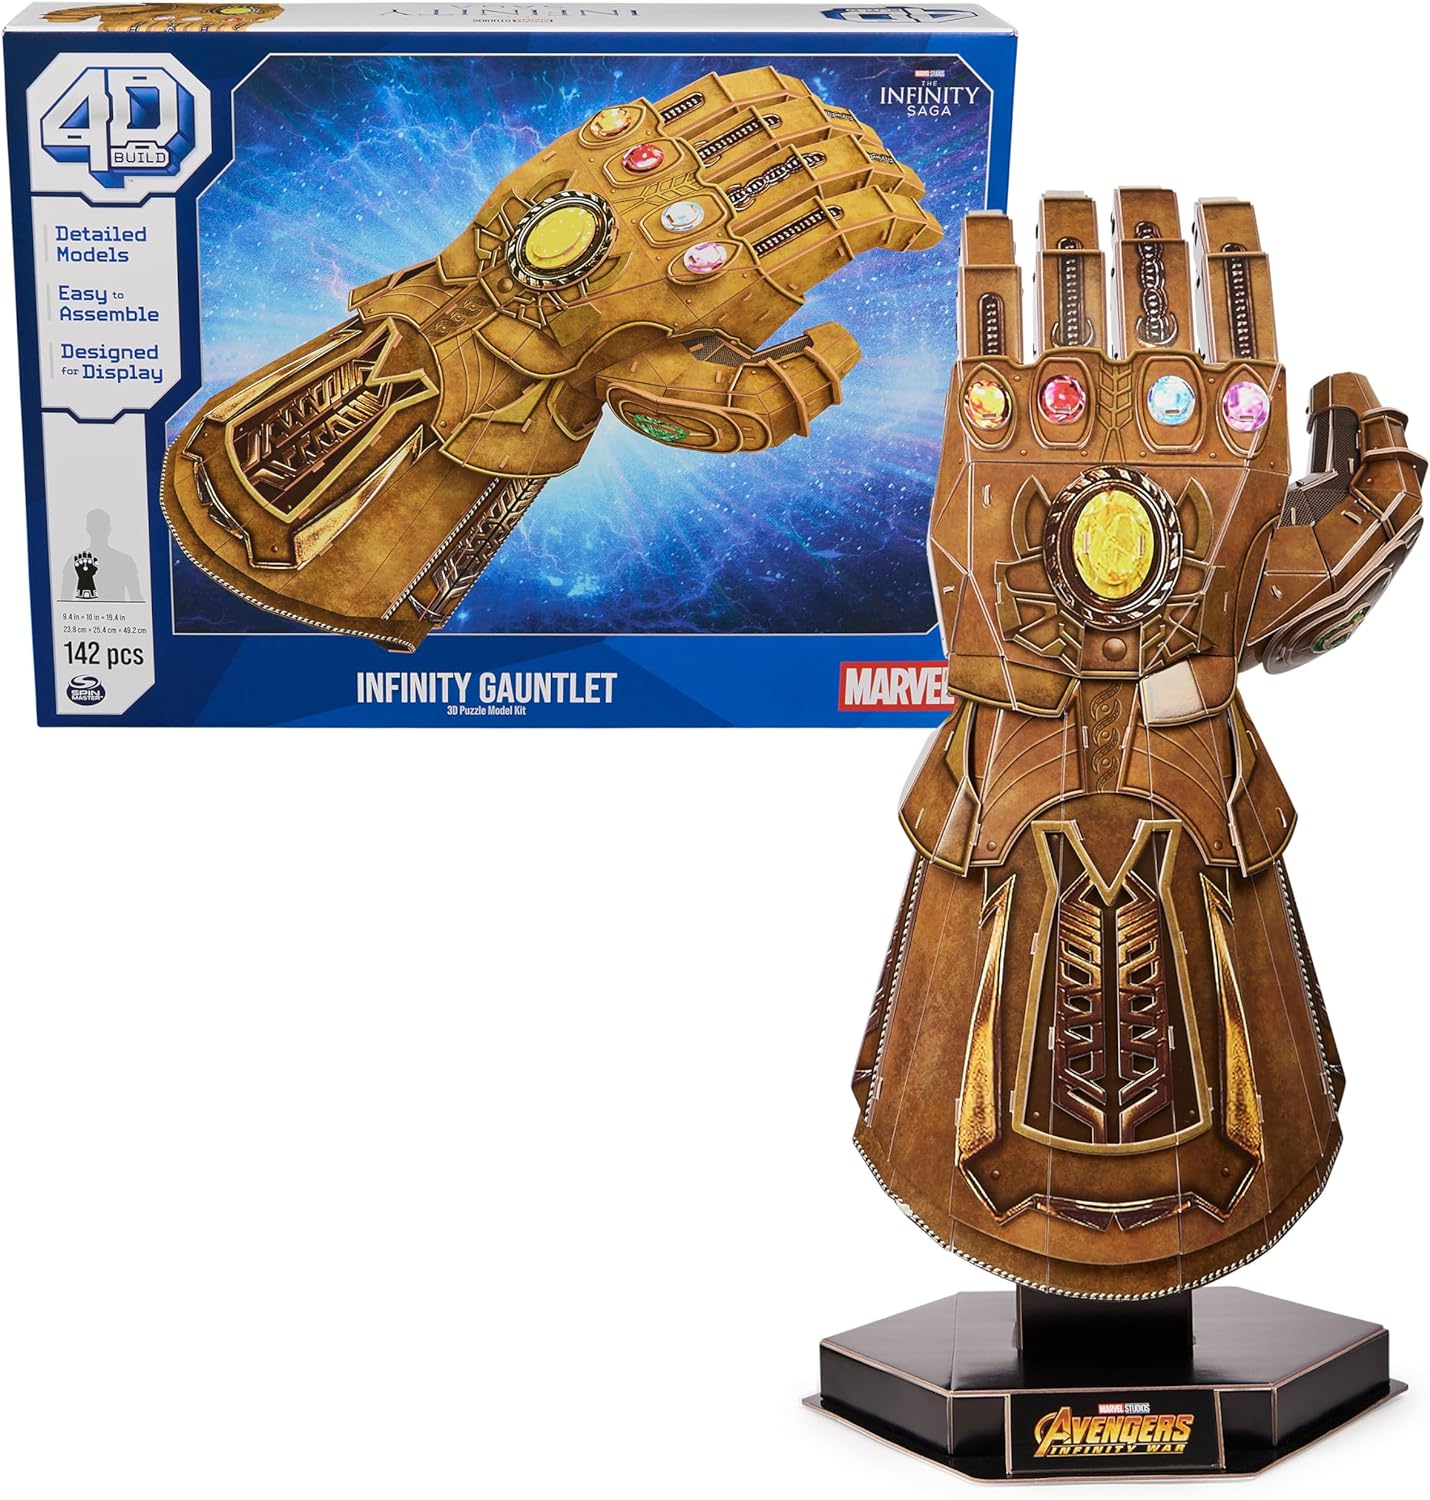 Marvel 4D Build 3D Puzzle Model Kits w/ Stand: 142-Piece Infinity Gauntlet $14.40, 87-Piece Mjolnir Thor's Hammer $9.69, 82-Piece Spider-Man $9 + Free Shipping w/ Prime or on $35+